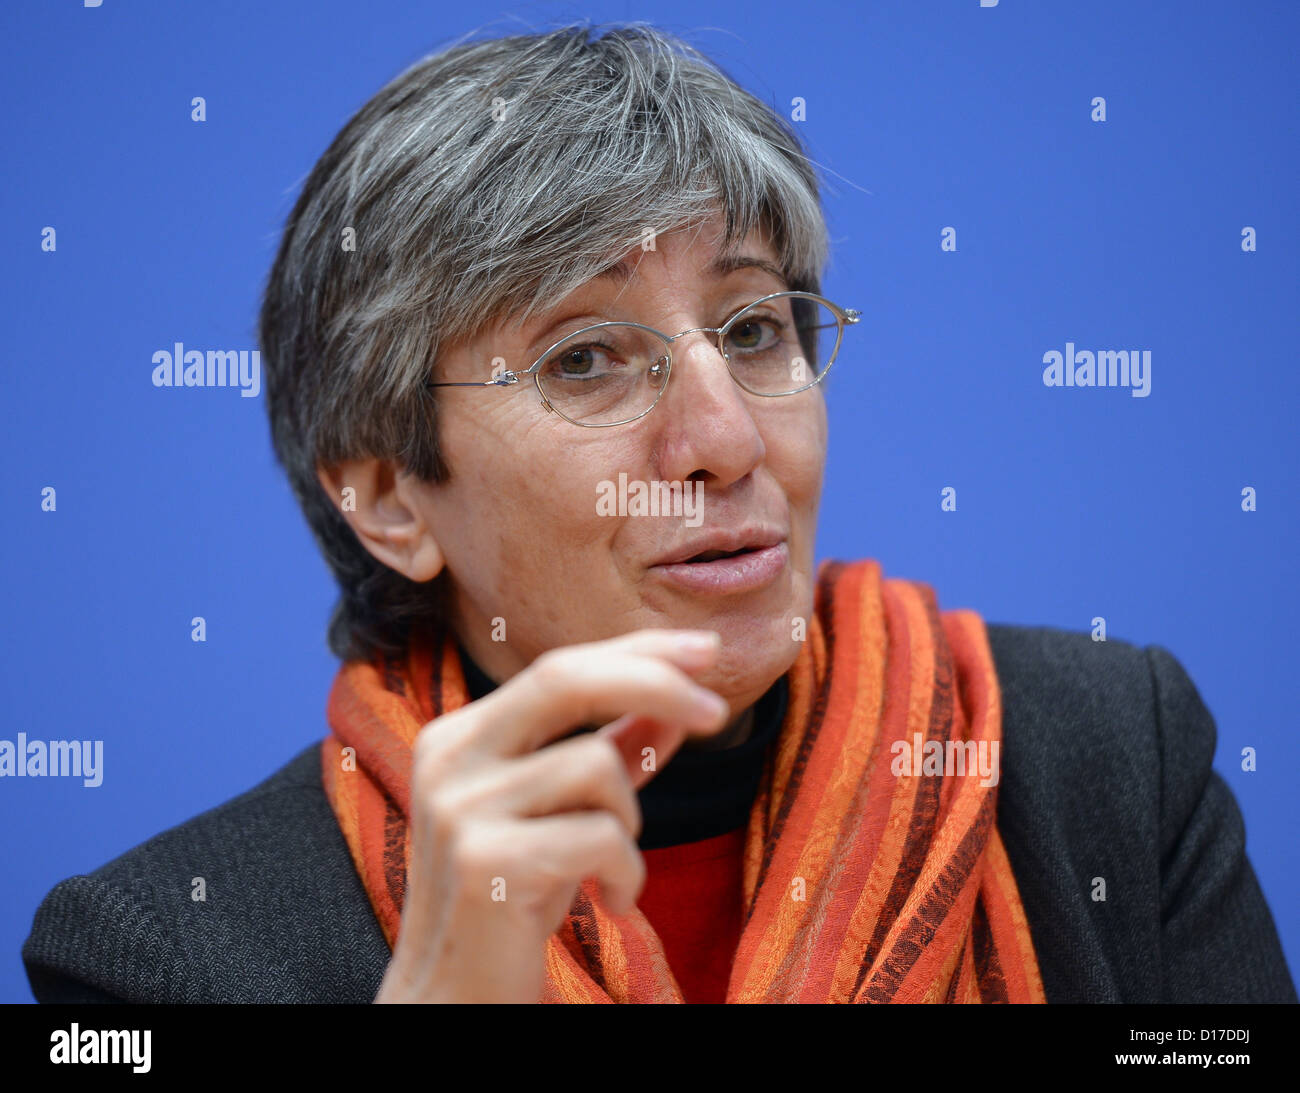 Winner of the 'alternative Nobel Peace Prize' Sima Samar from Afghanistan speaks during a press conference in Berlin, Germany, 10 December 2012. She asks the community of states not to give up on Avghansitan after the withdrawal of international striking forces. Photo: Britta Pedersen Stock Photo